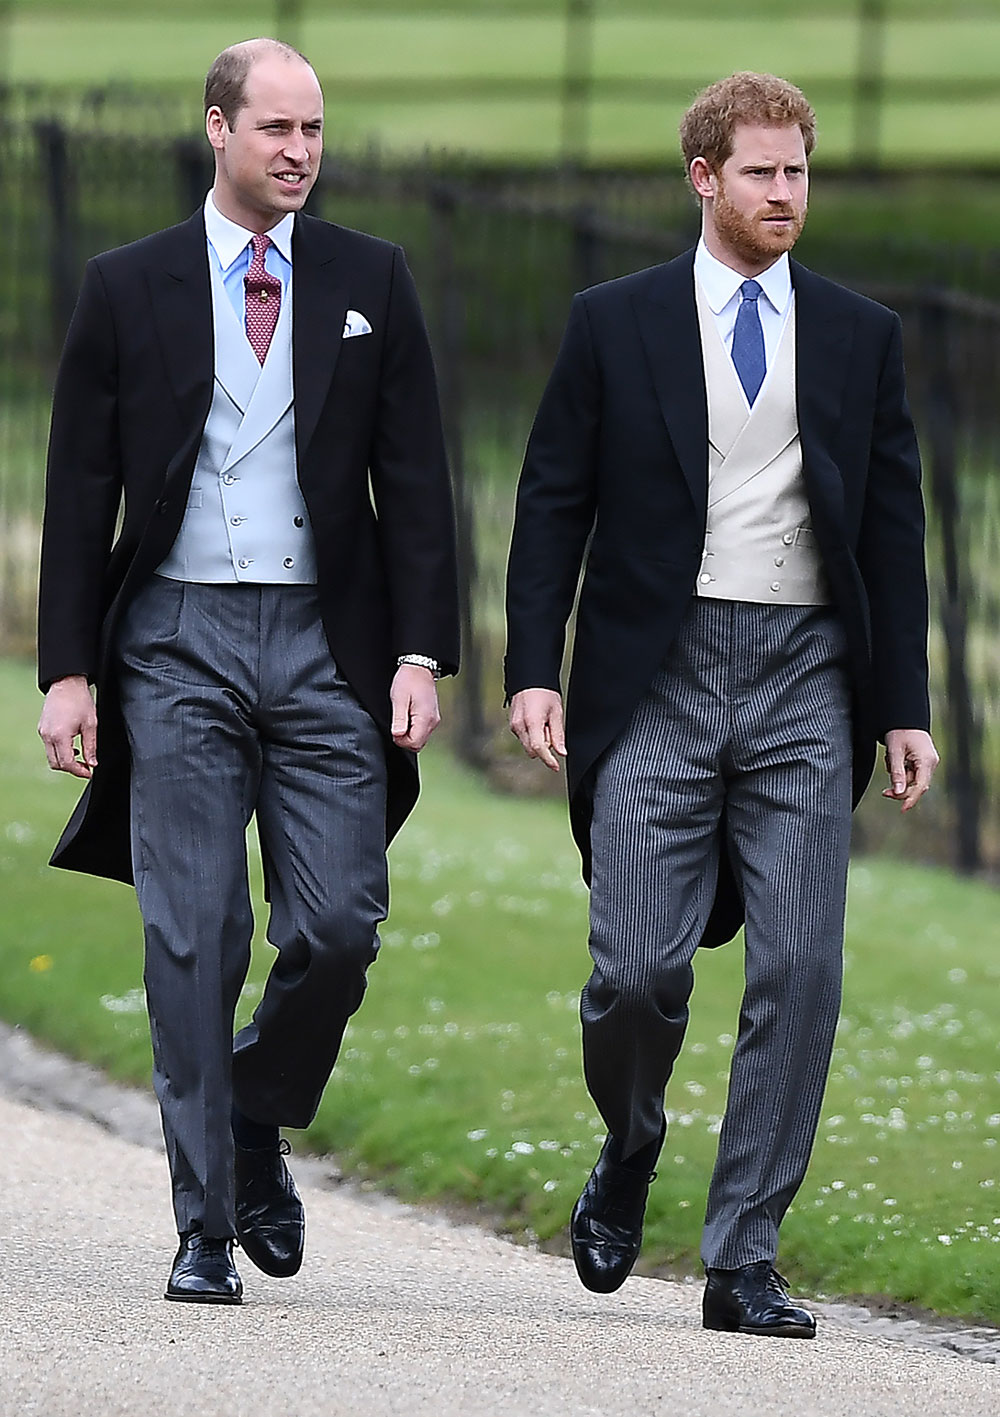 Prince William and Prince Harry. Prince Harry's girlfriend, actress Meghan Markle, is reportedly in the UK but has not been seen among the guests at the church.